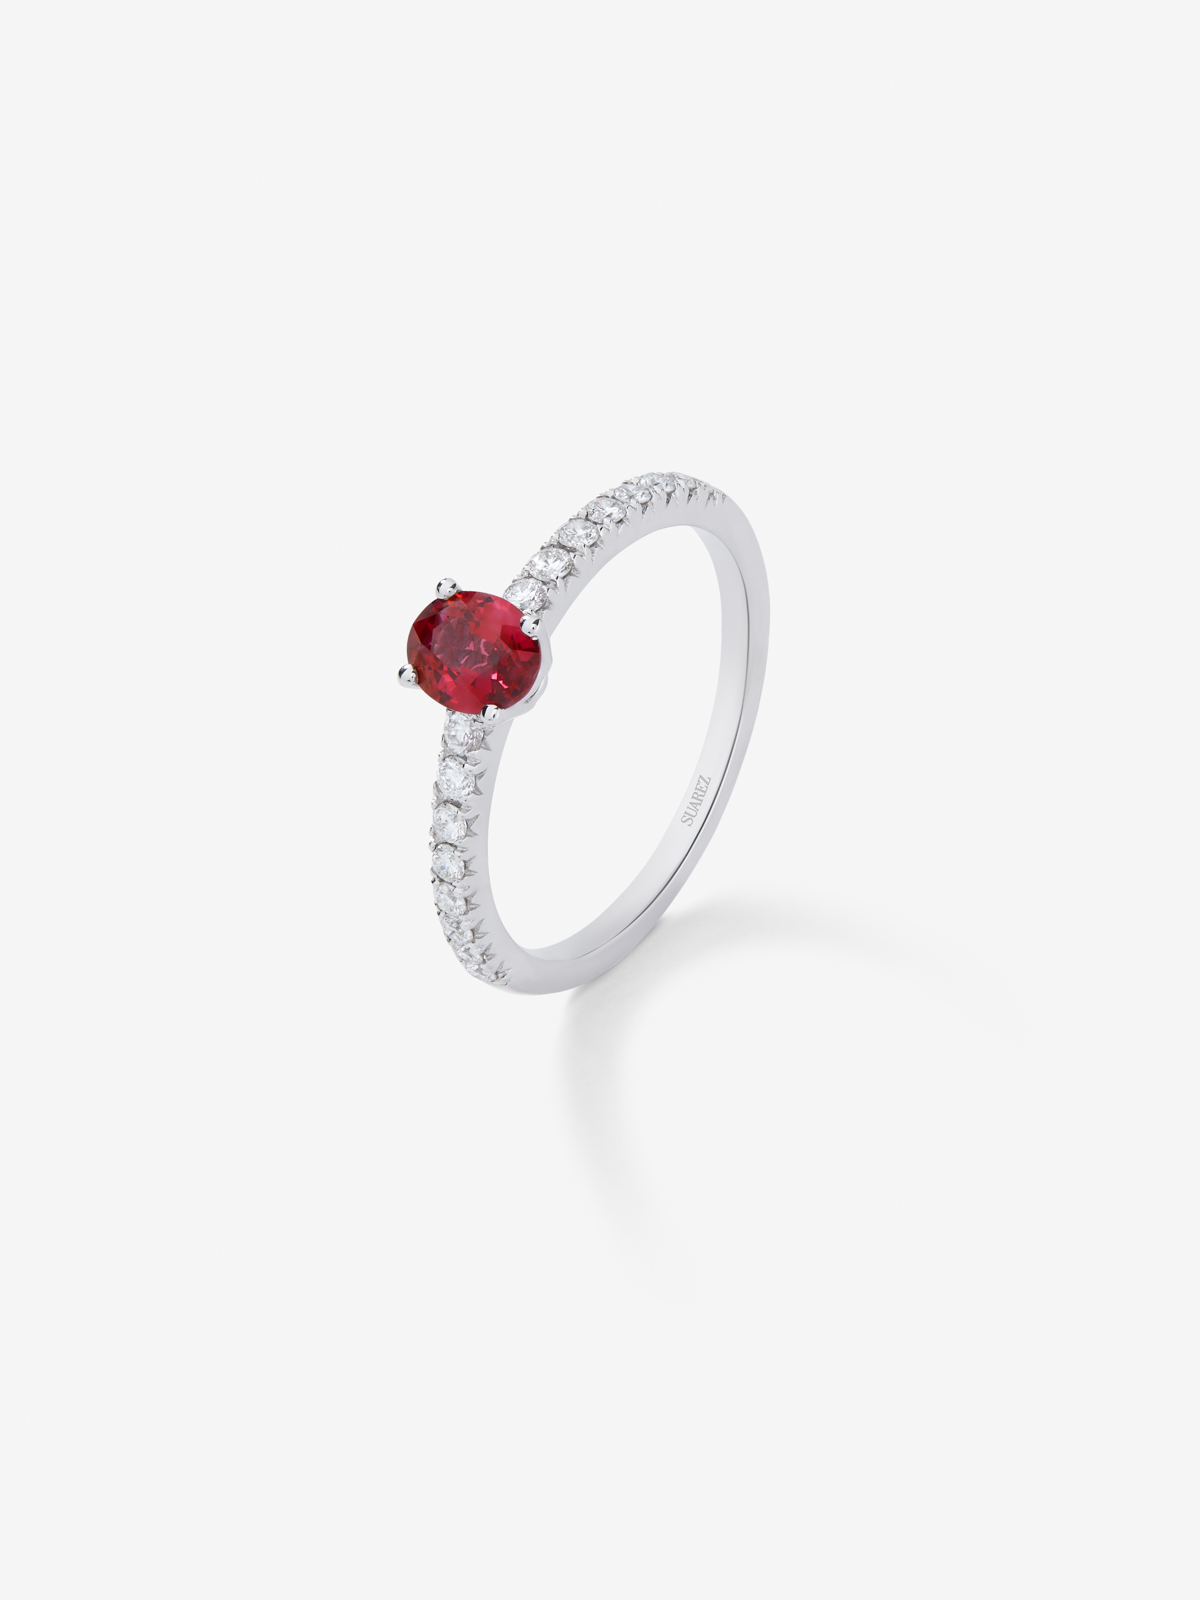 18K white gold ring with 0.25 ct oval cut ruby ​​and 0.12 ct brilliant cut white diamonds